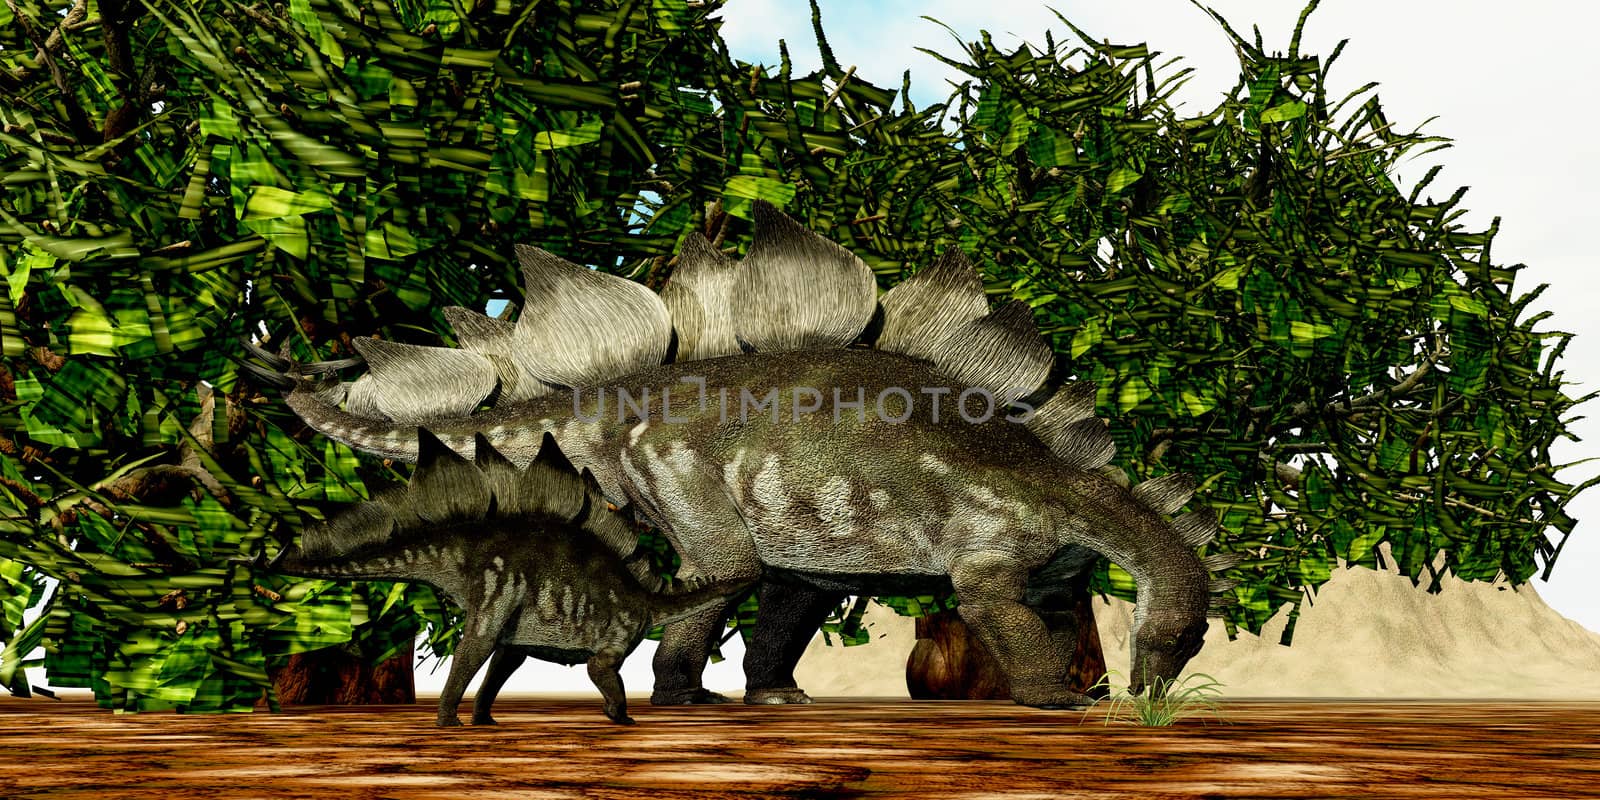 A Stegosaurus baby looks to its mother to find the best eating foliage.